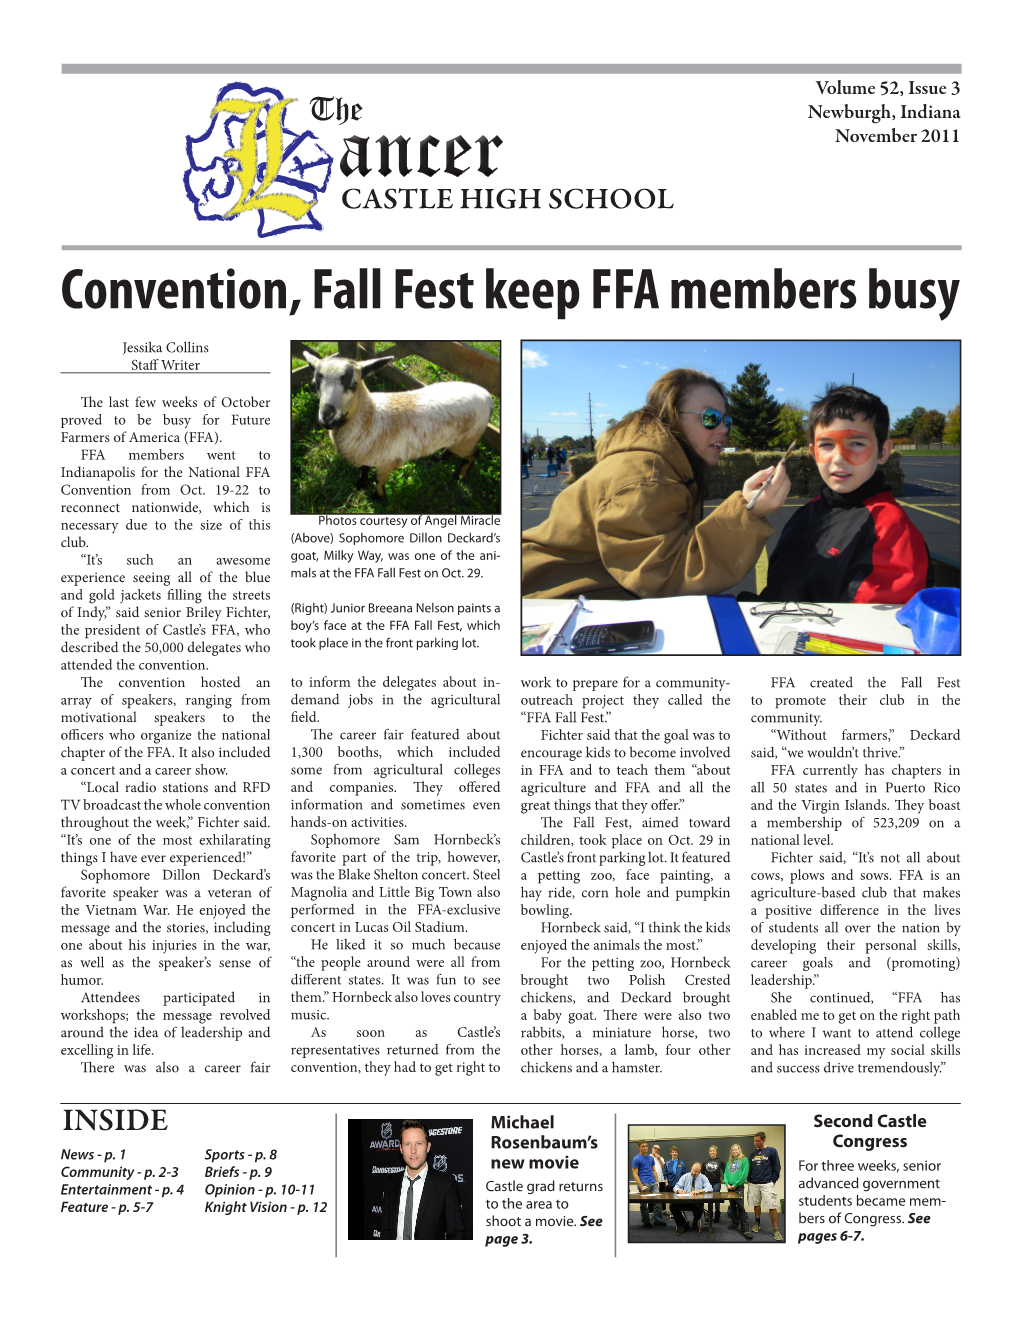 Convention, Fall Fest Keep FFA Members Busy